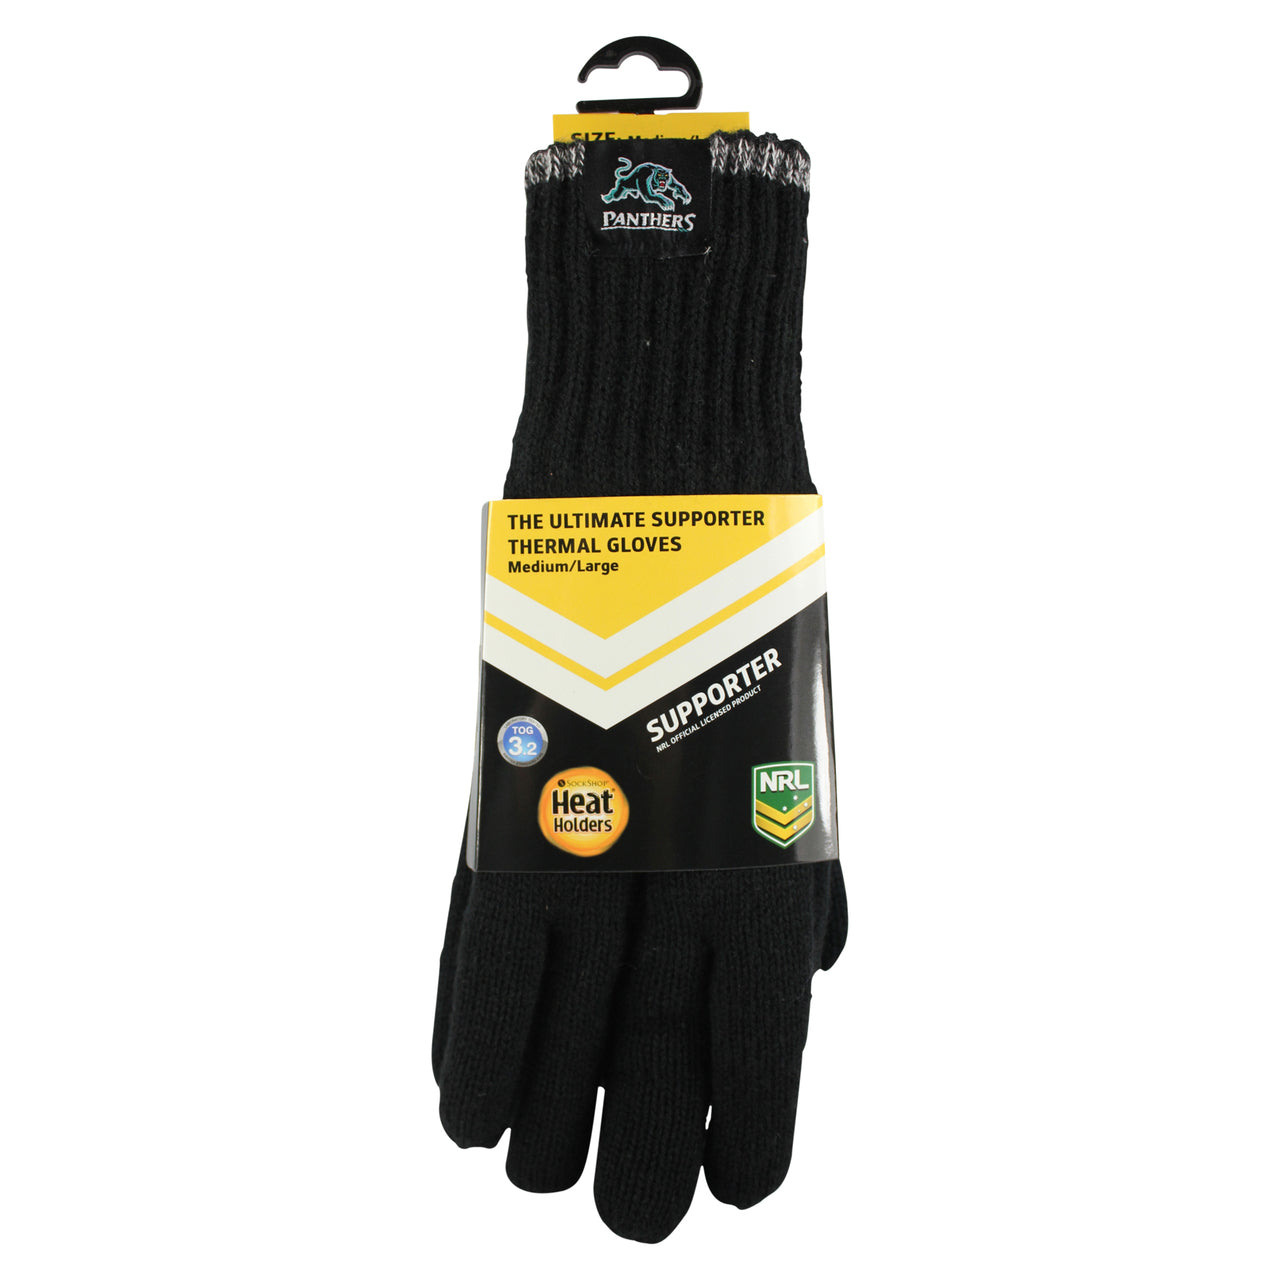 NRL Heat Holders Thermal Gloves Penrith Panthers